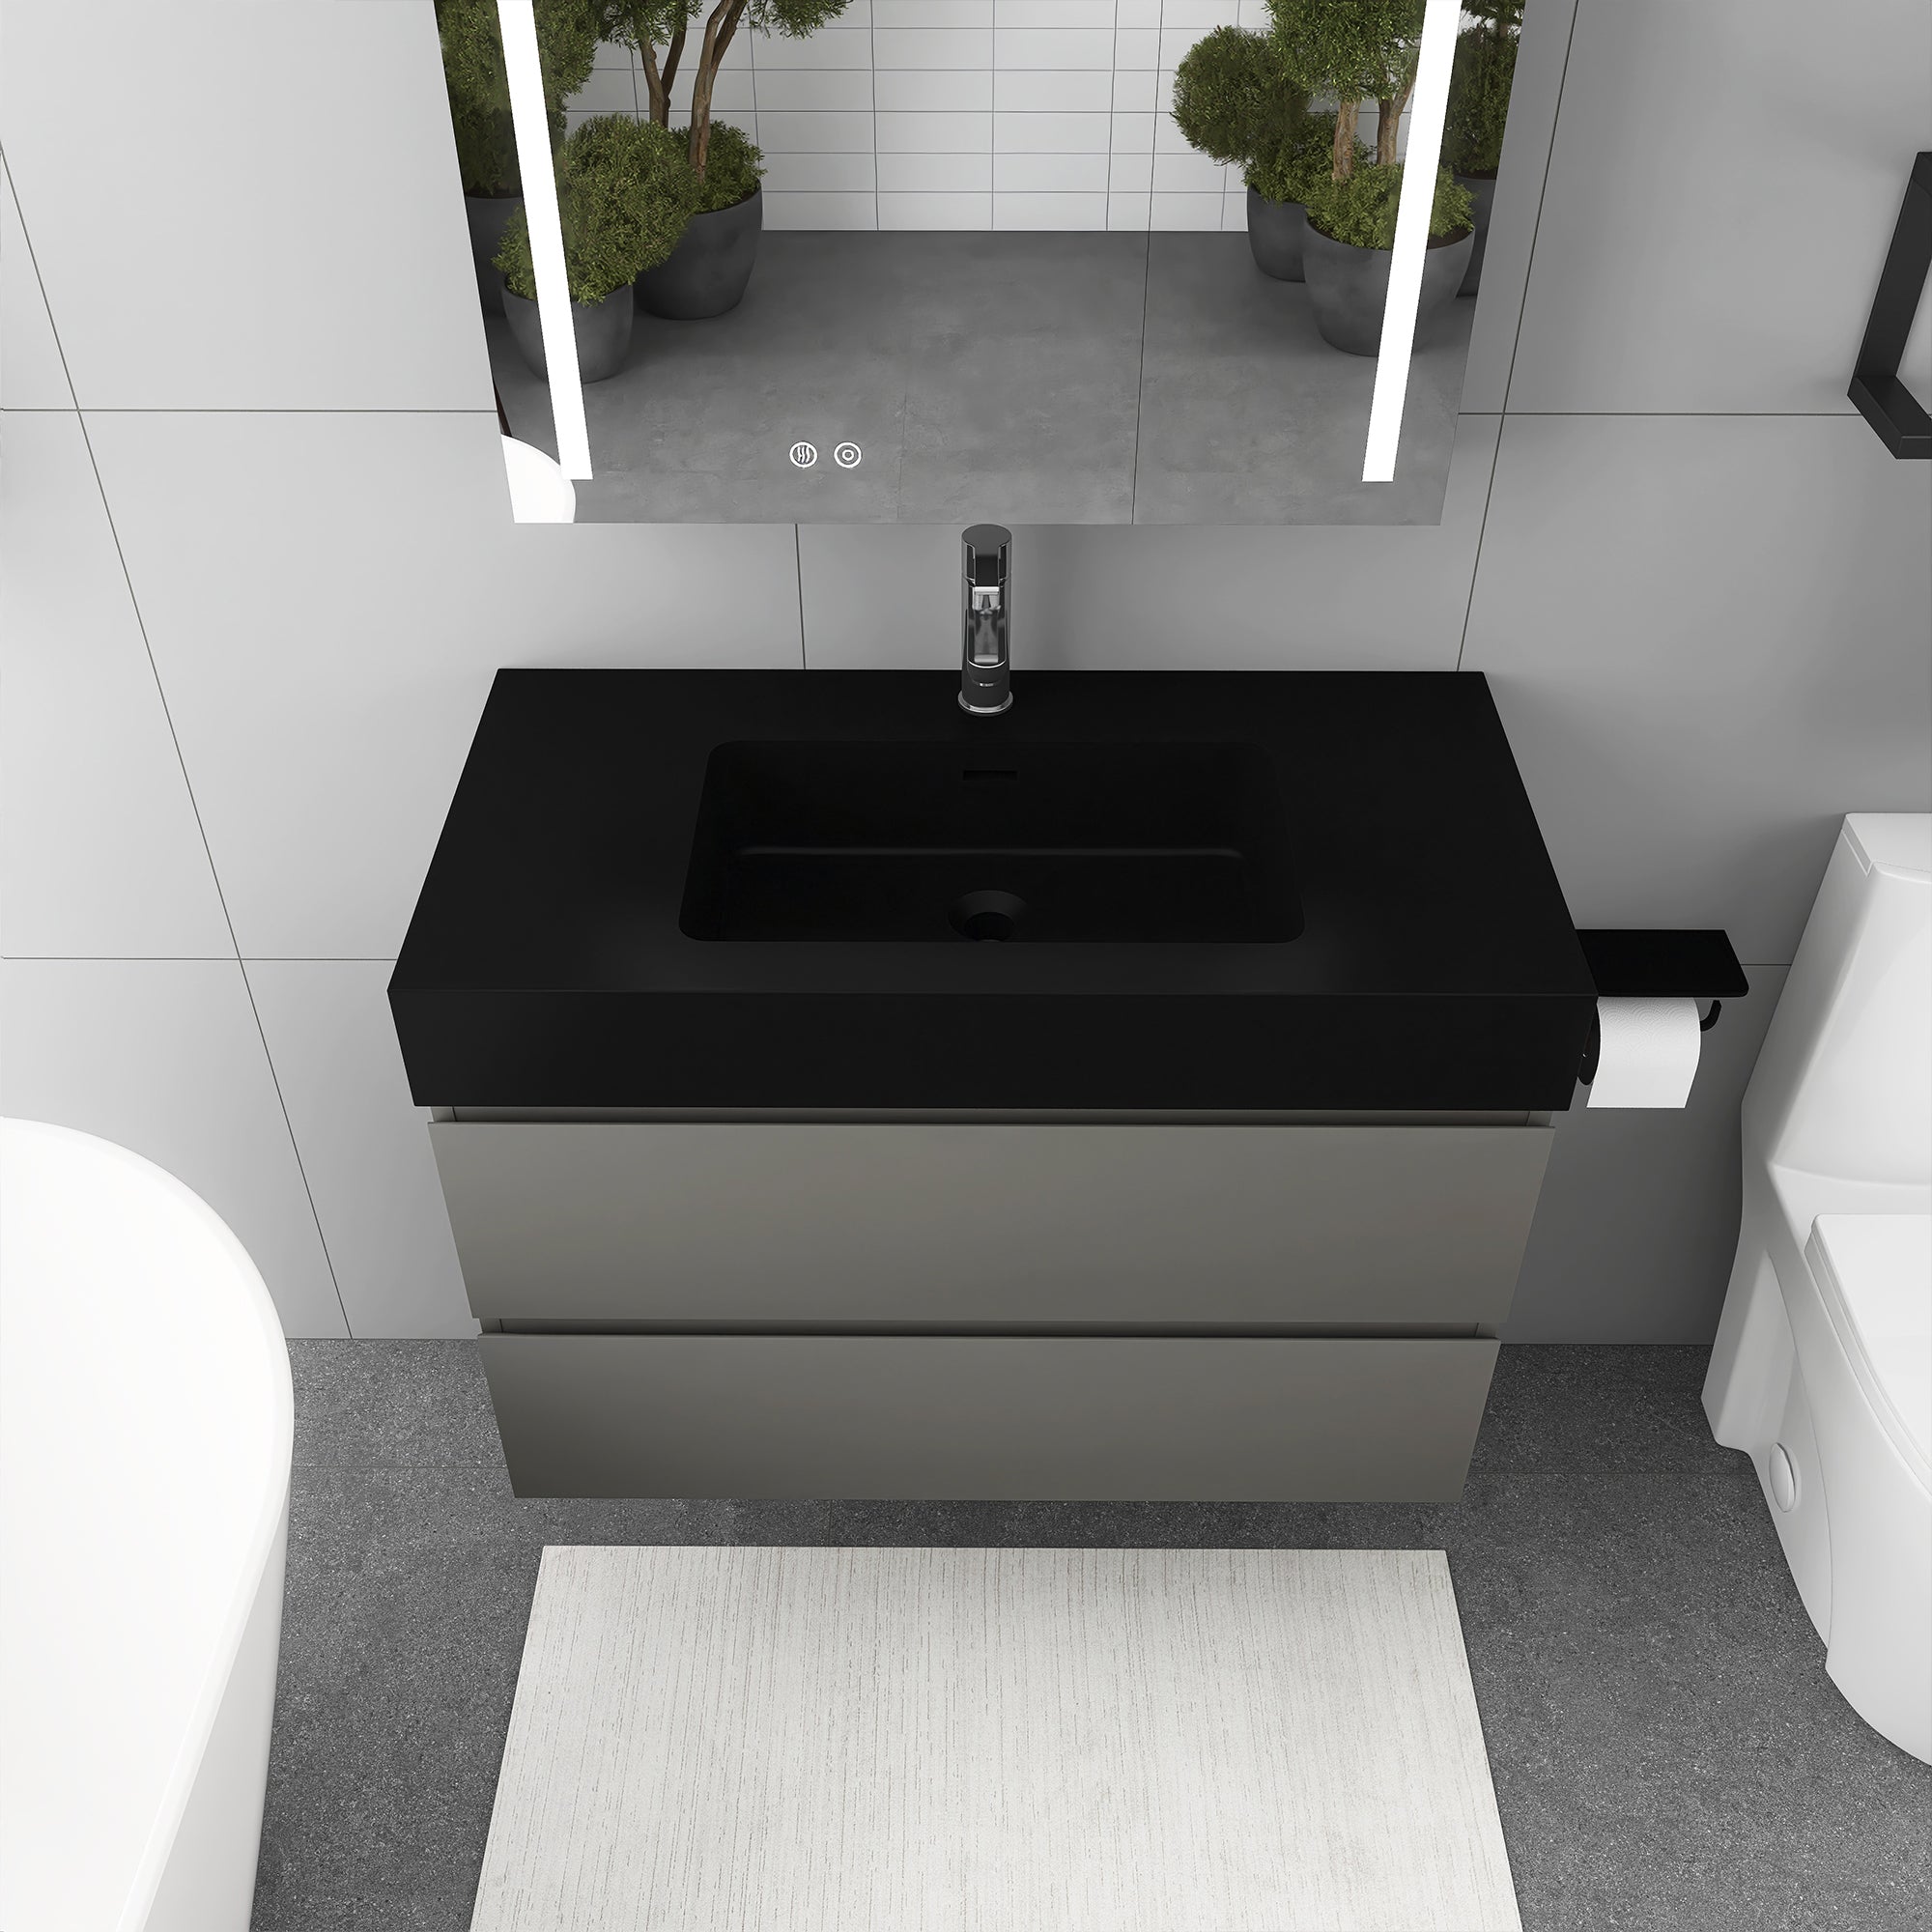 Staykiwi Wall-Mounted Bathroom Vanity Set with Black Integrated Solid Surface Sink